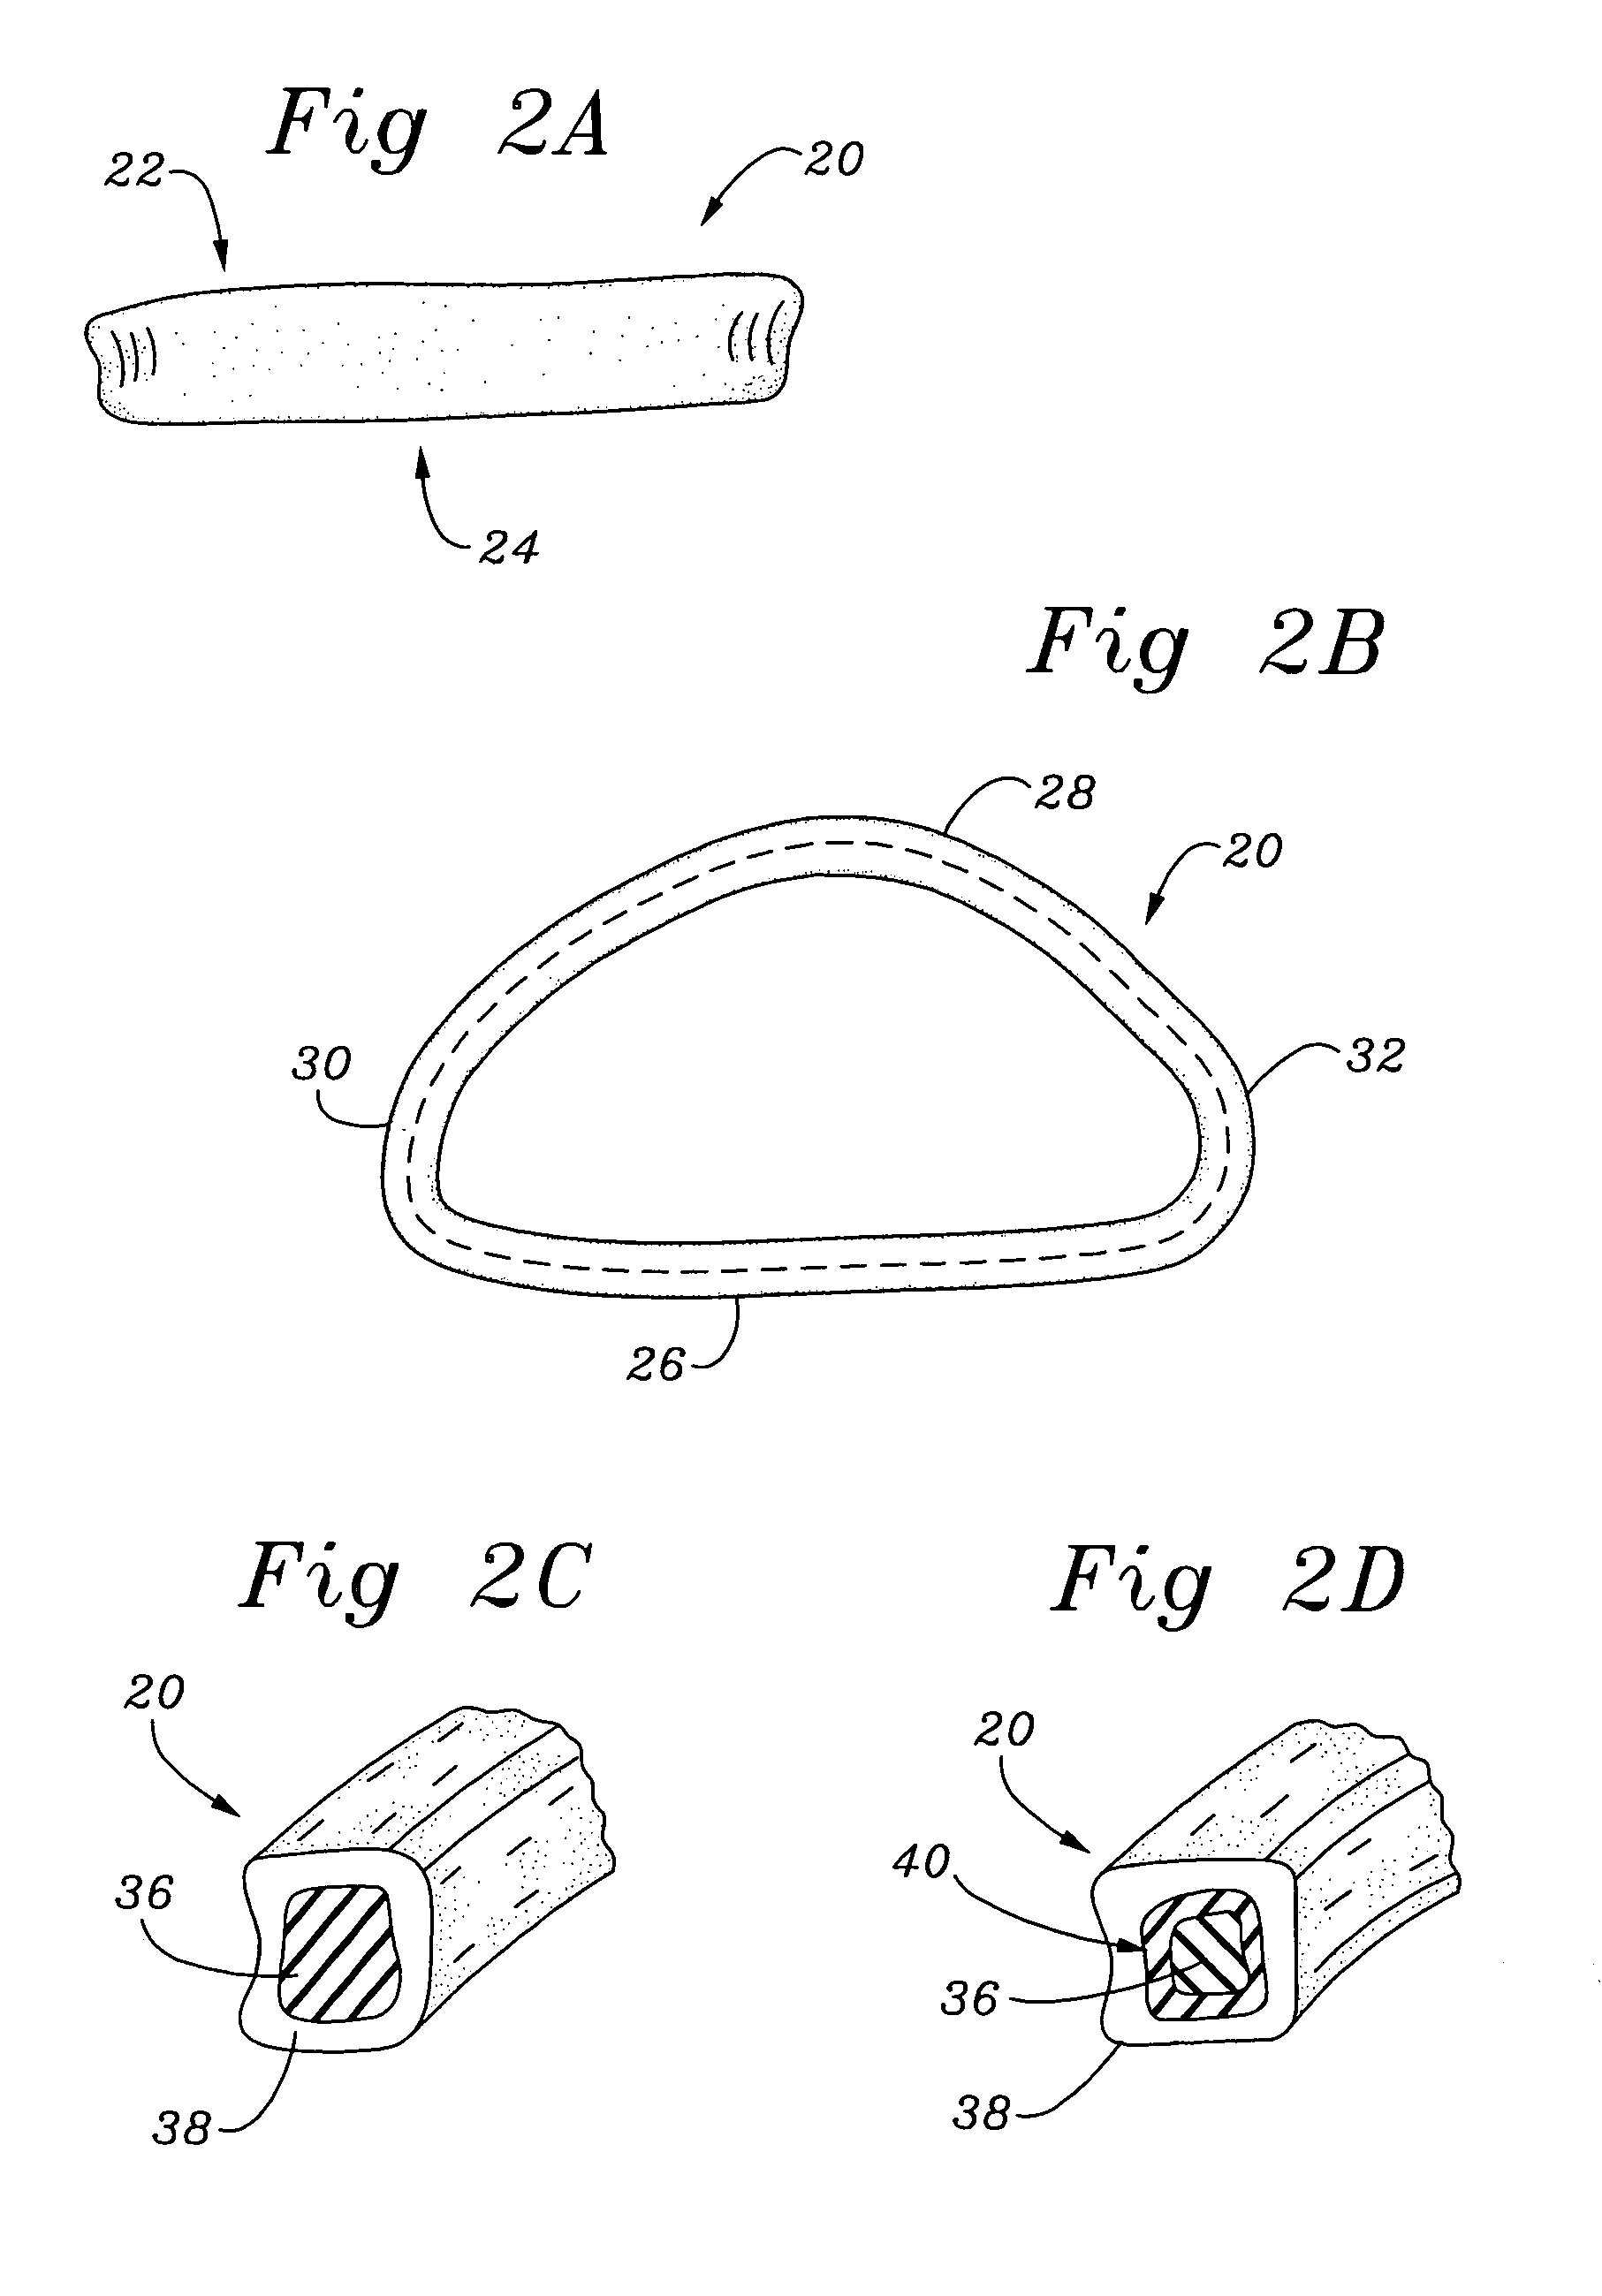 Method of implanting a self-molding annuloplasty ring